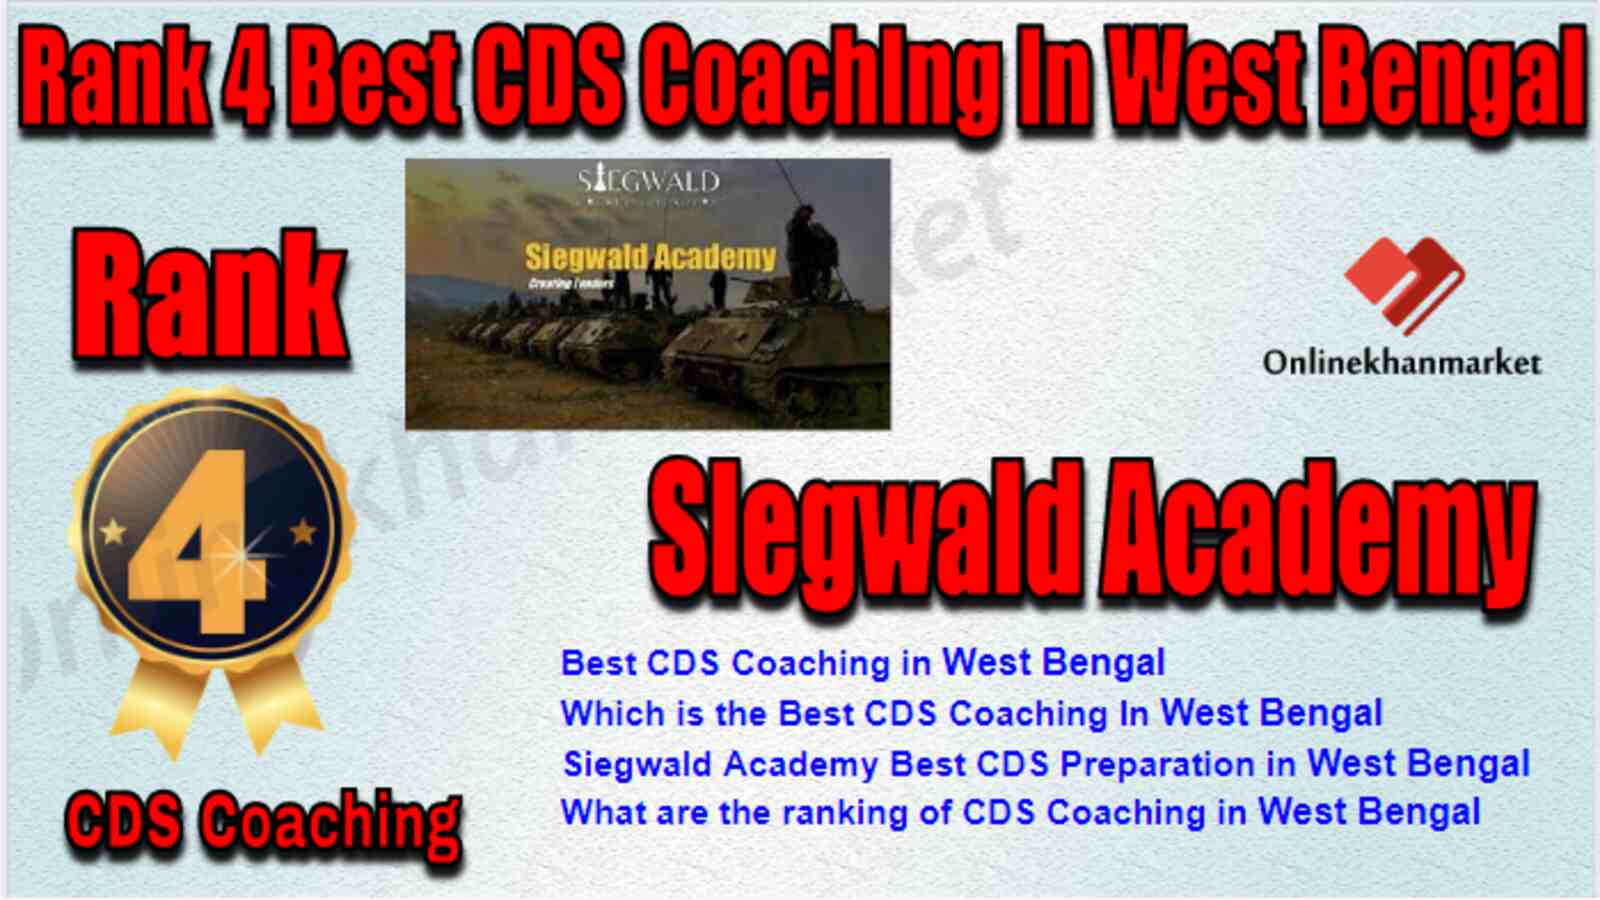 Rank 4 Best CDS Coaching in West Bengal